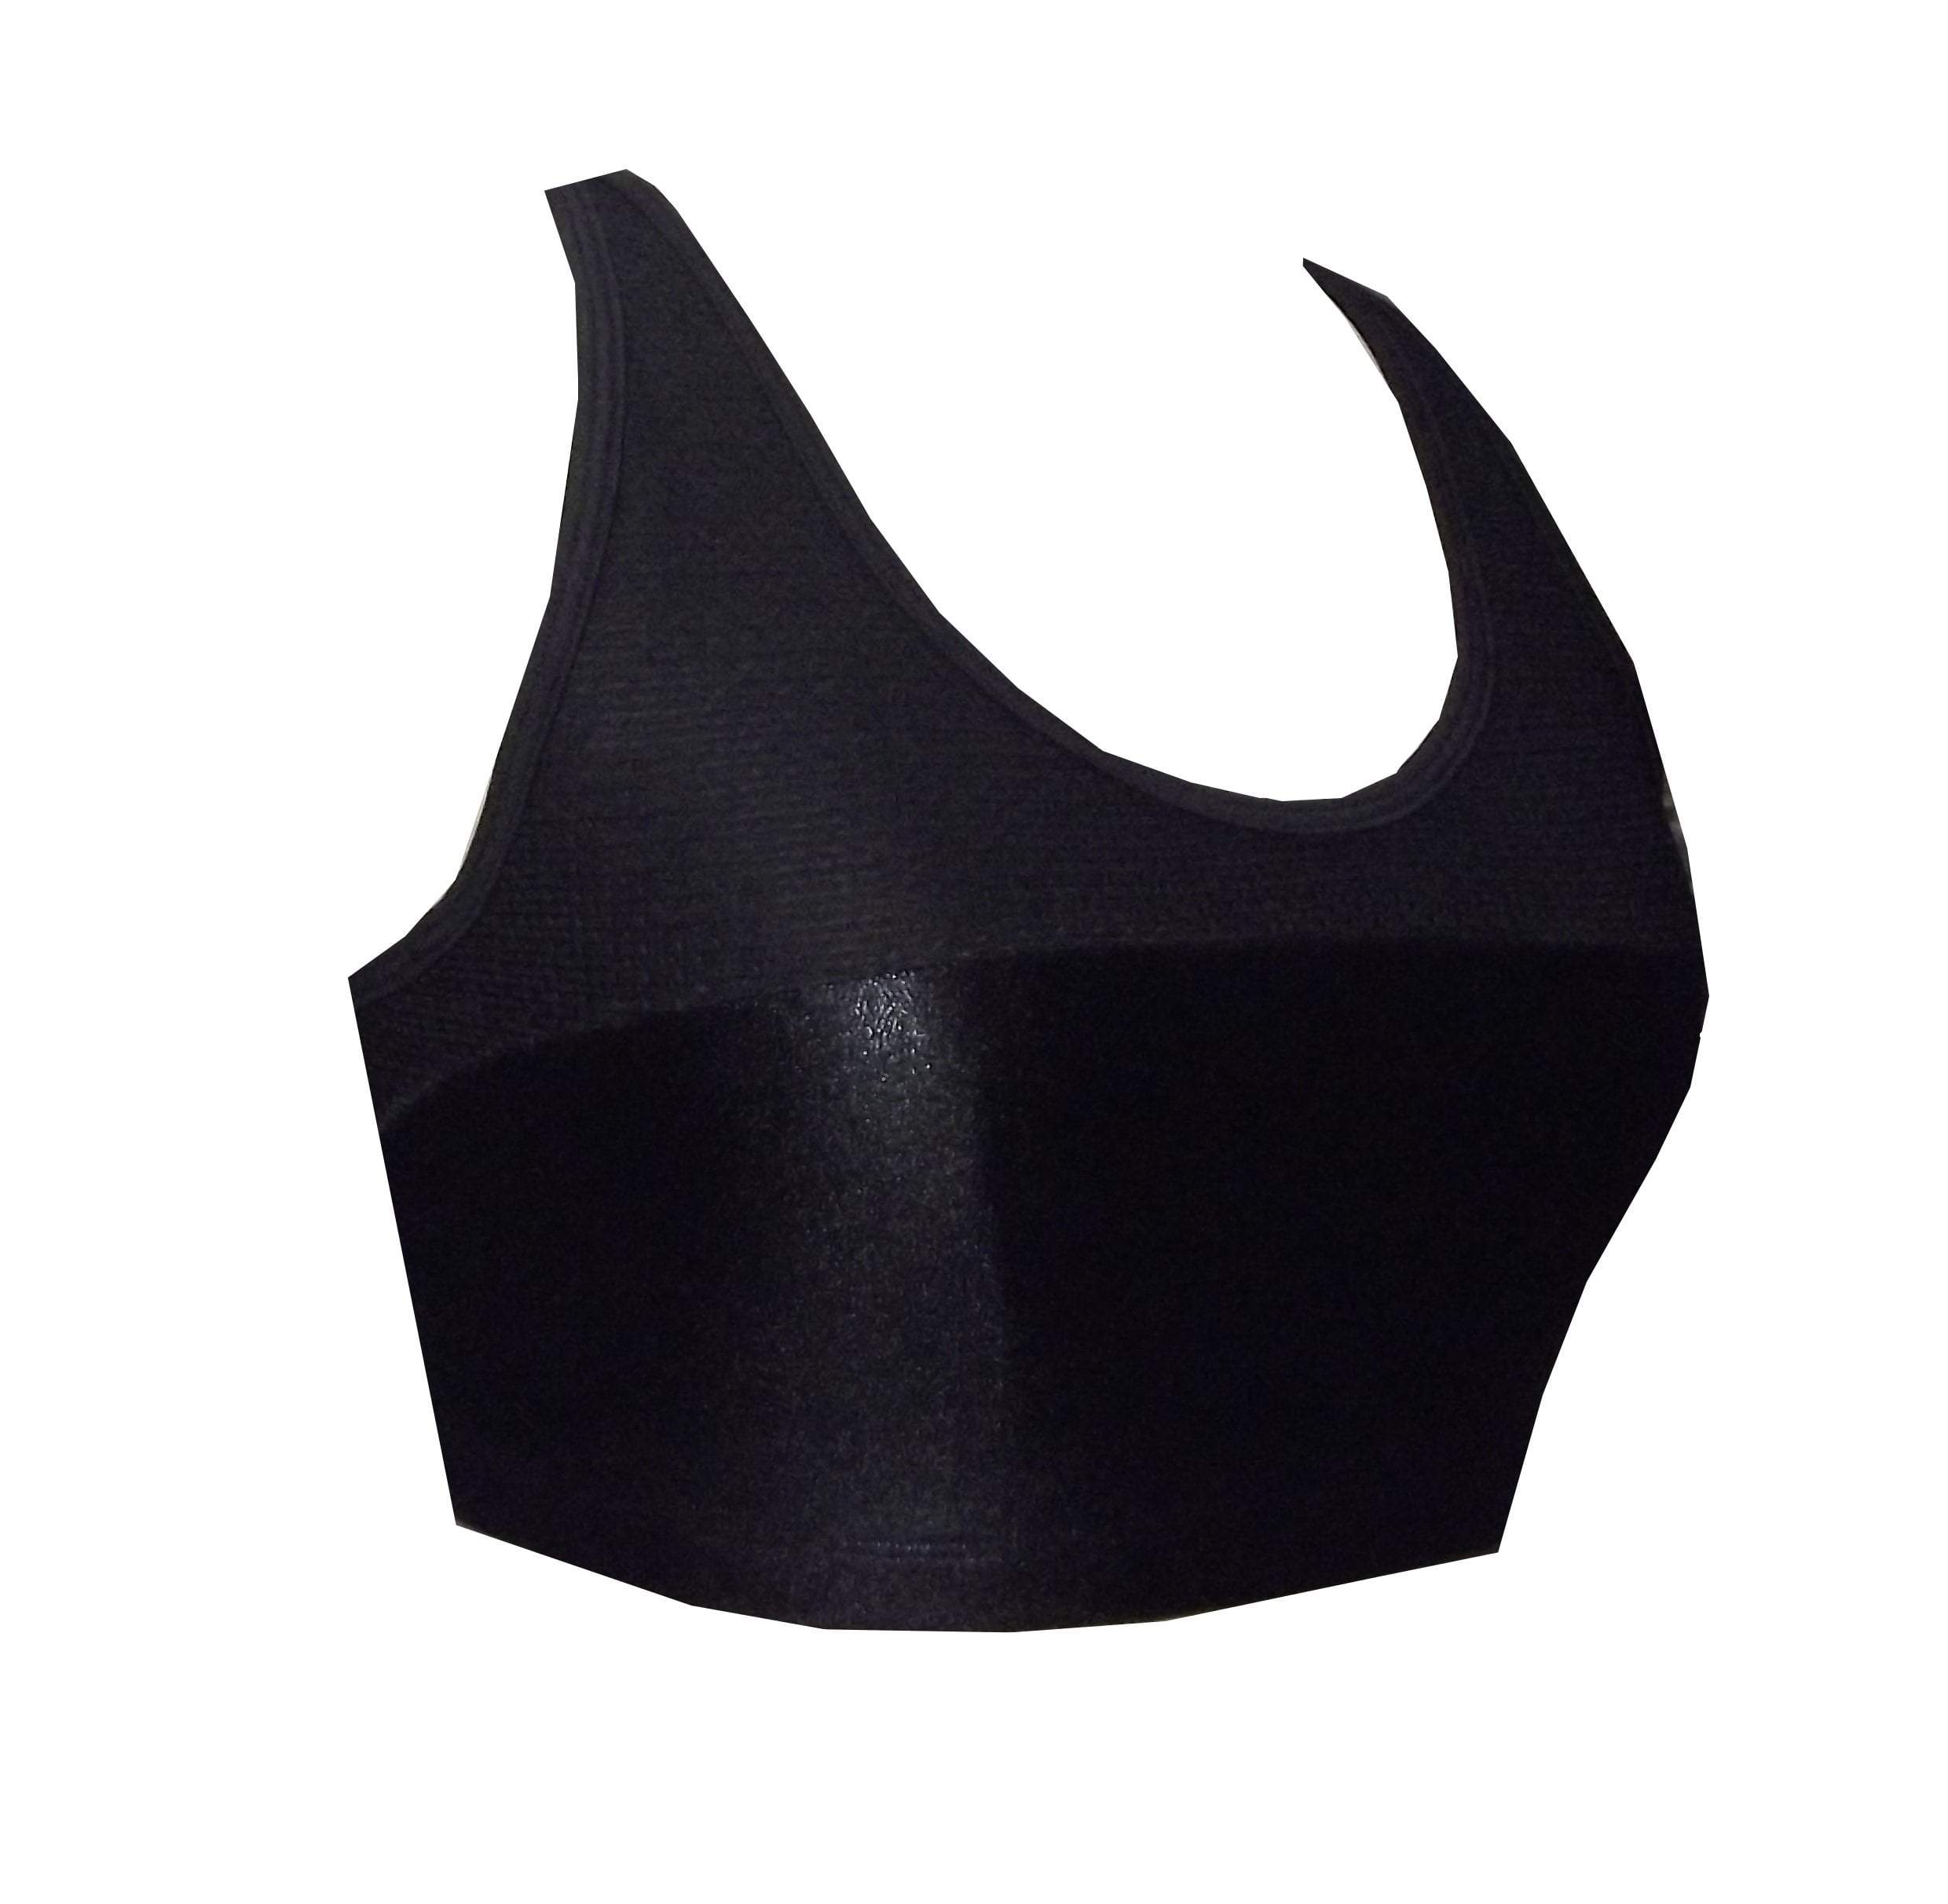 Leather-look and Sports Mesh Crop Top - Be Activewear